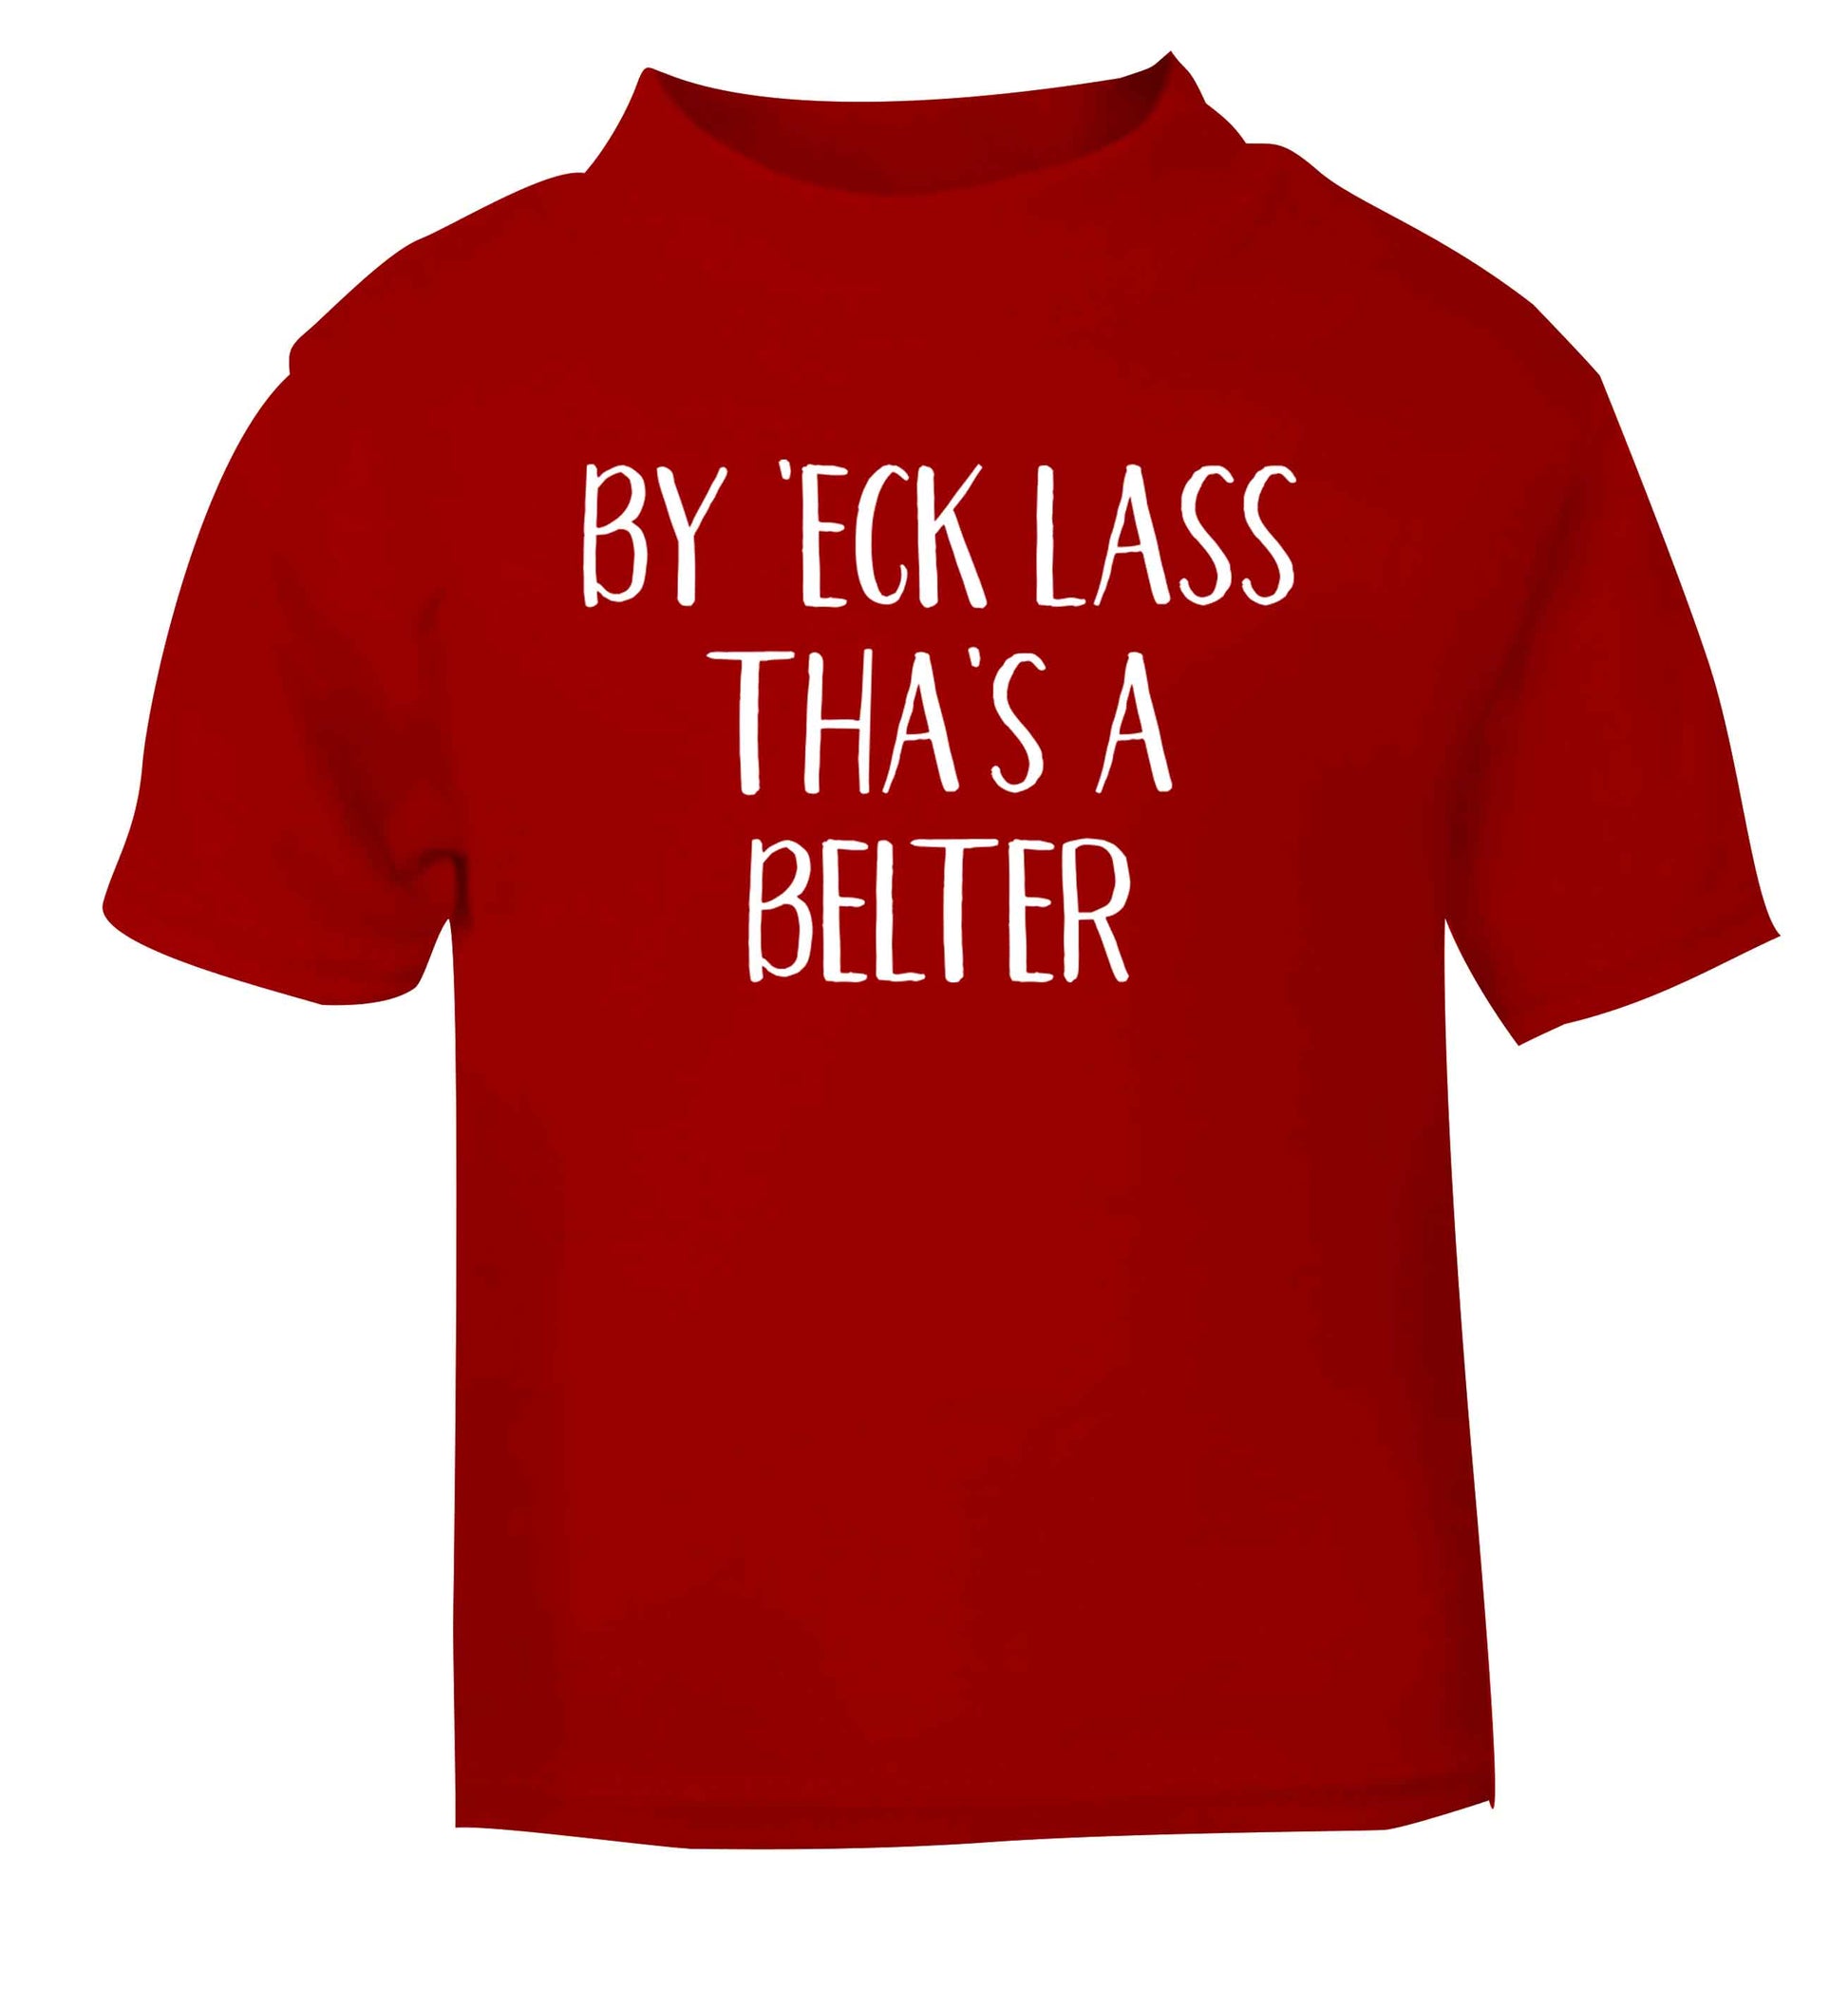 Be 'eck lass tha's a belter red Baby Toddler Tshirt 2 Years